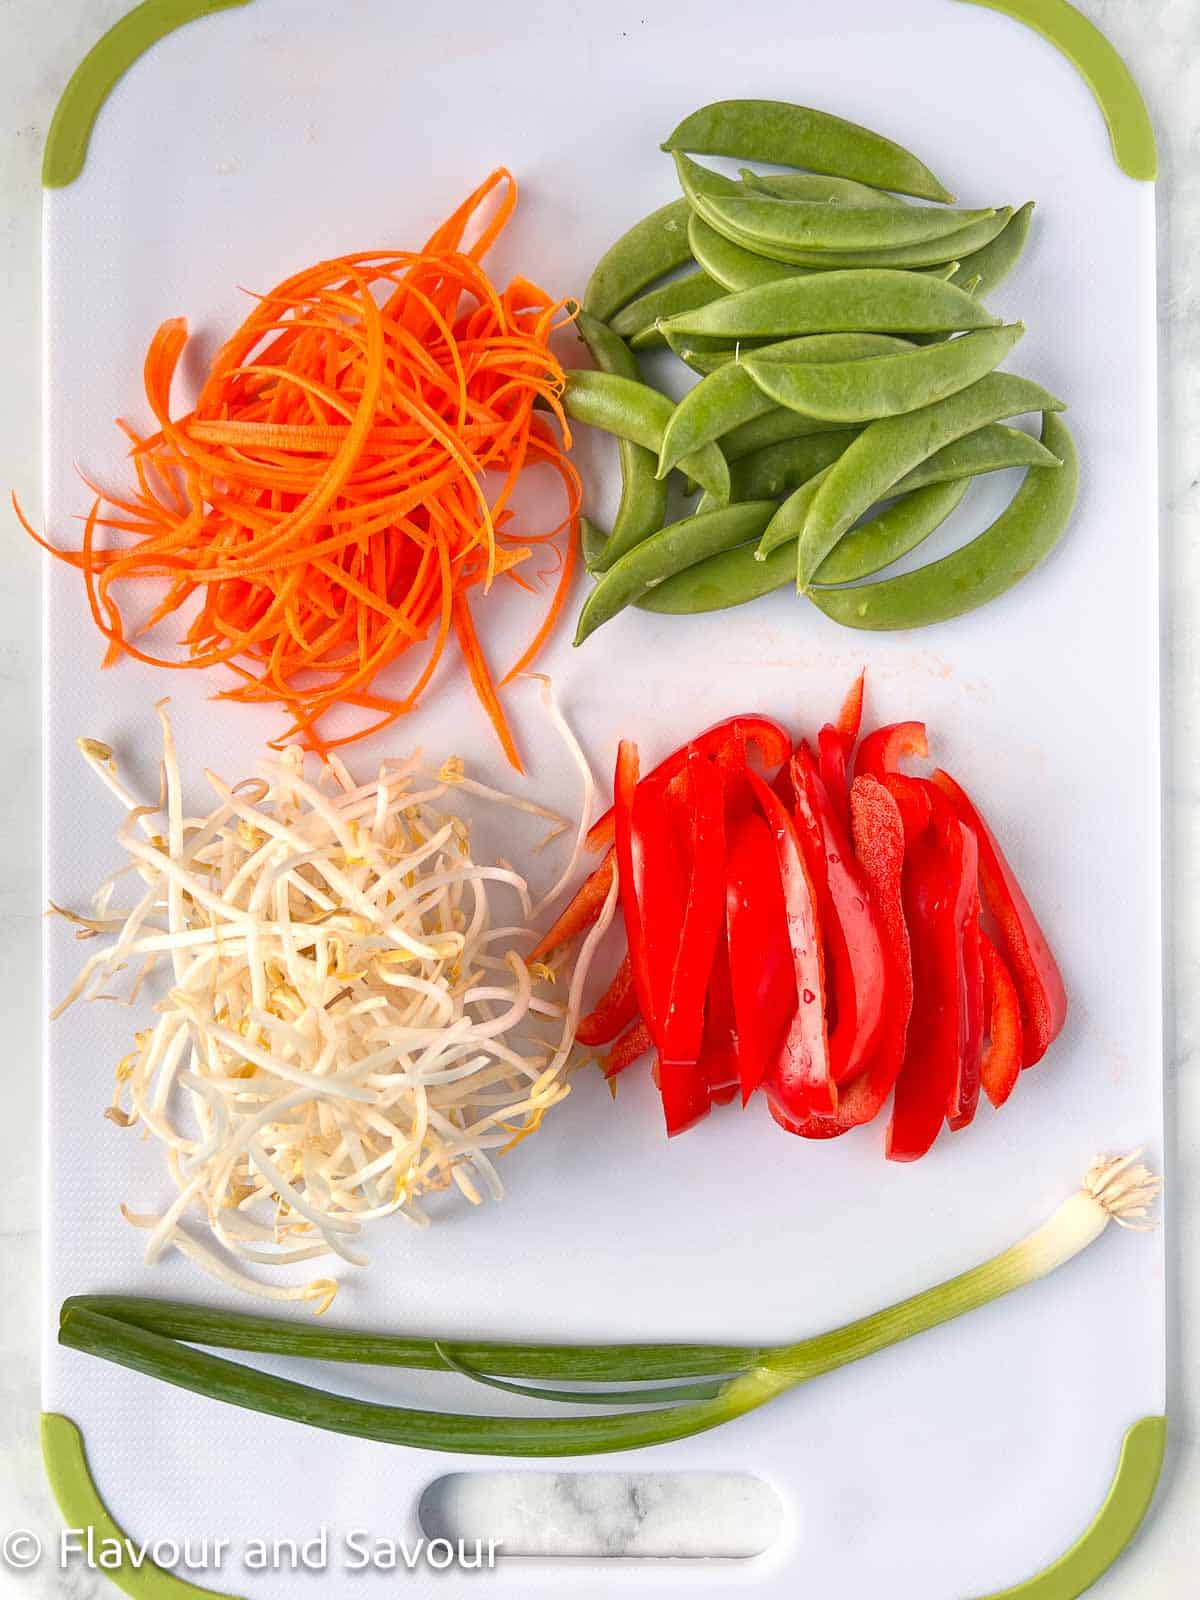 Snap peas, julienned carrots, red pepper strips, bean sprouts and a green onion on a cutting board.